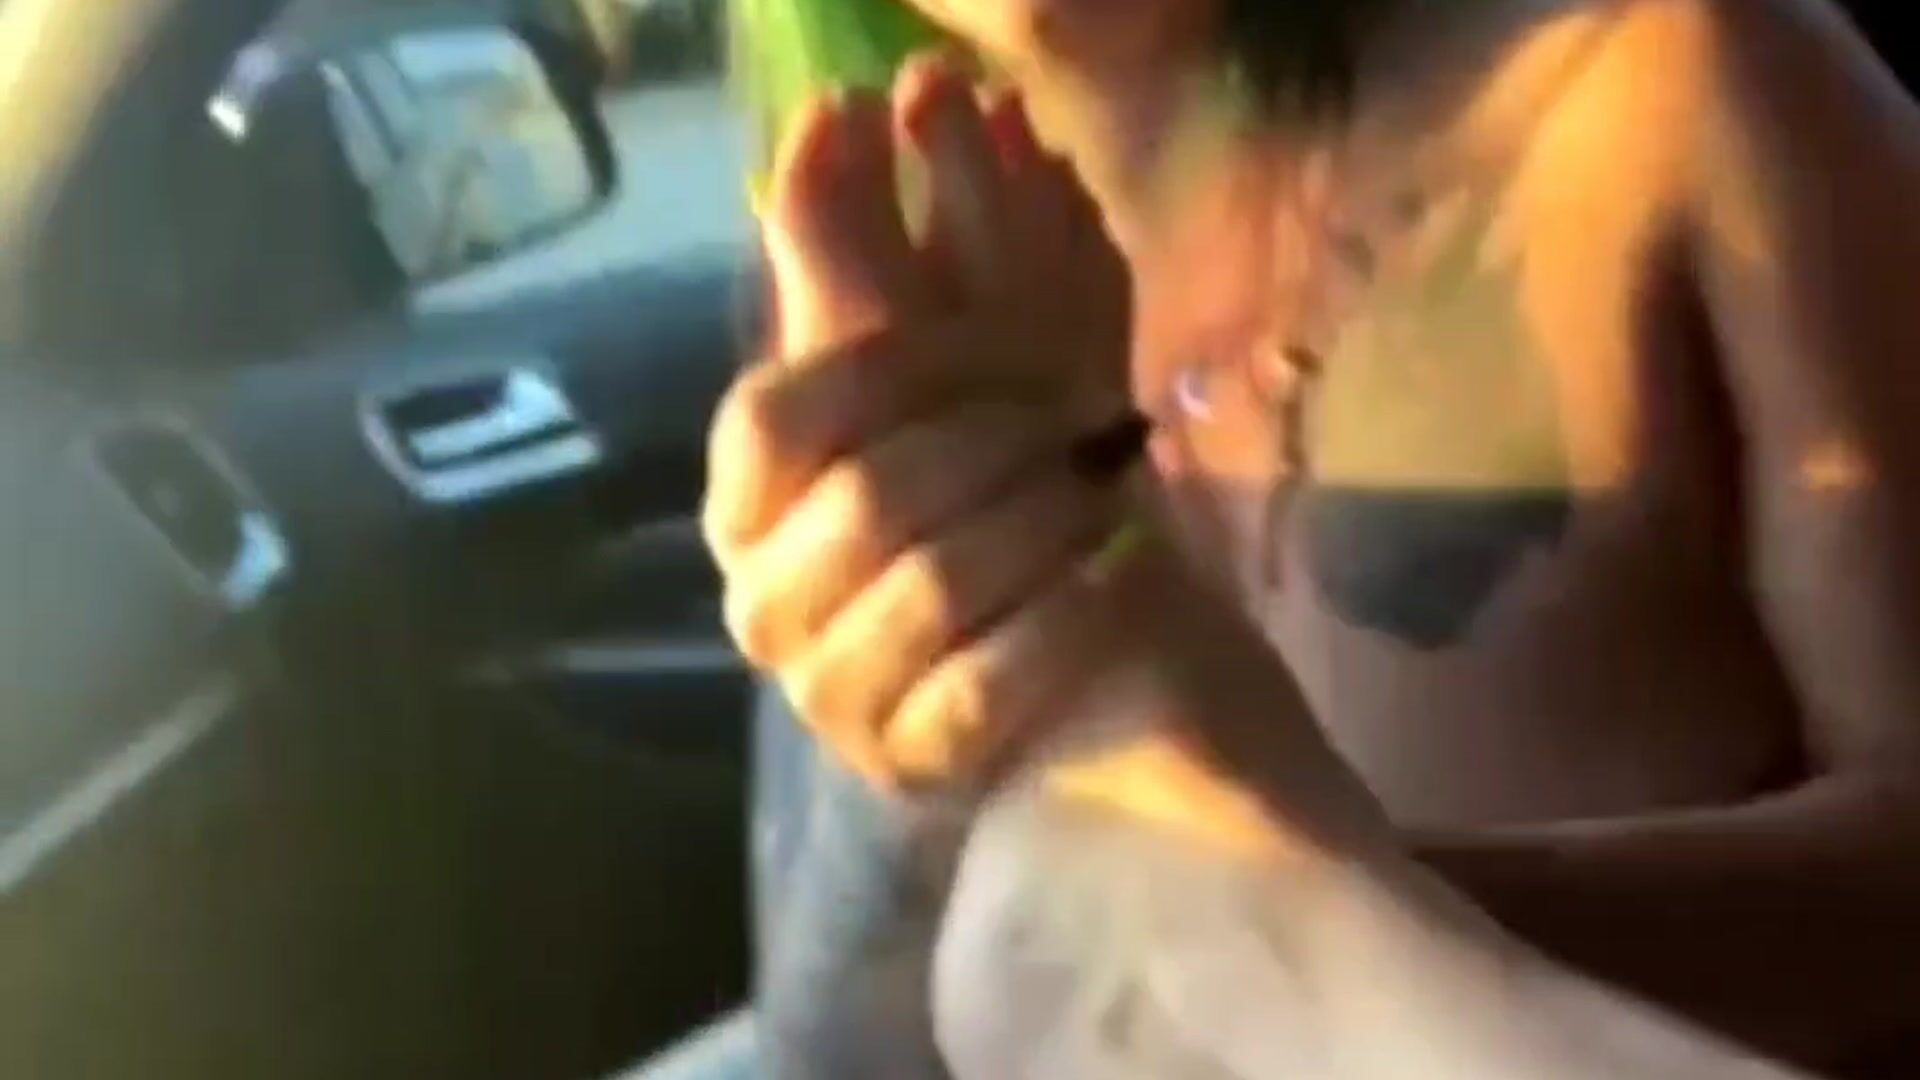 suck each others toes, girl/girl